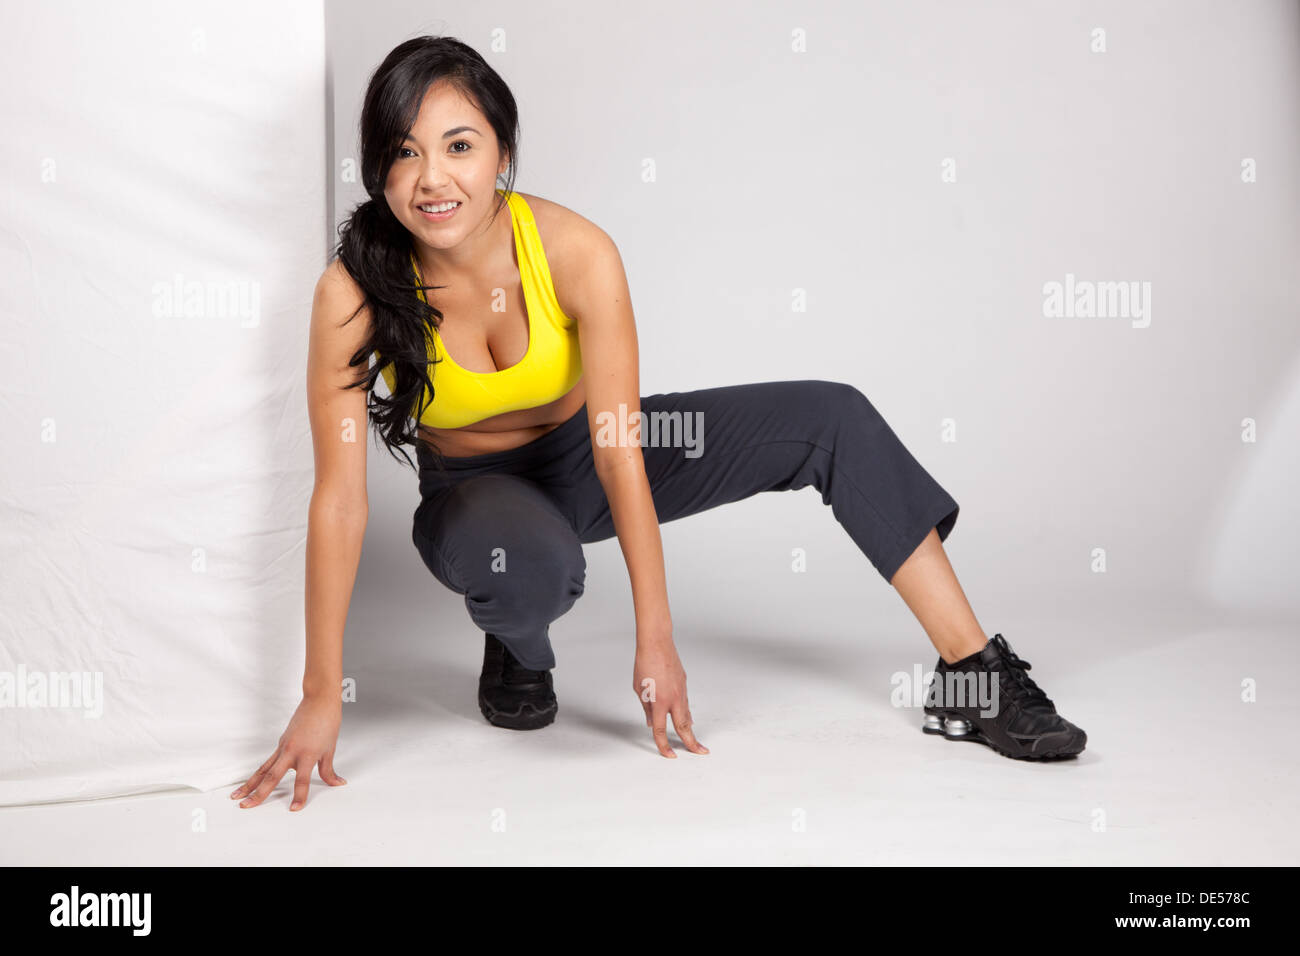 Pretty Hispanic lady wearing work out clothes and posing Stock Photo